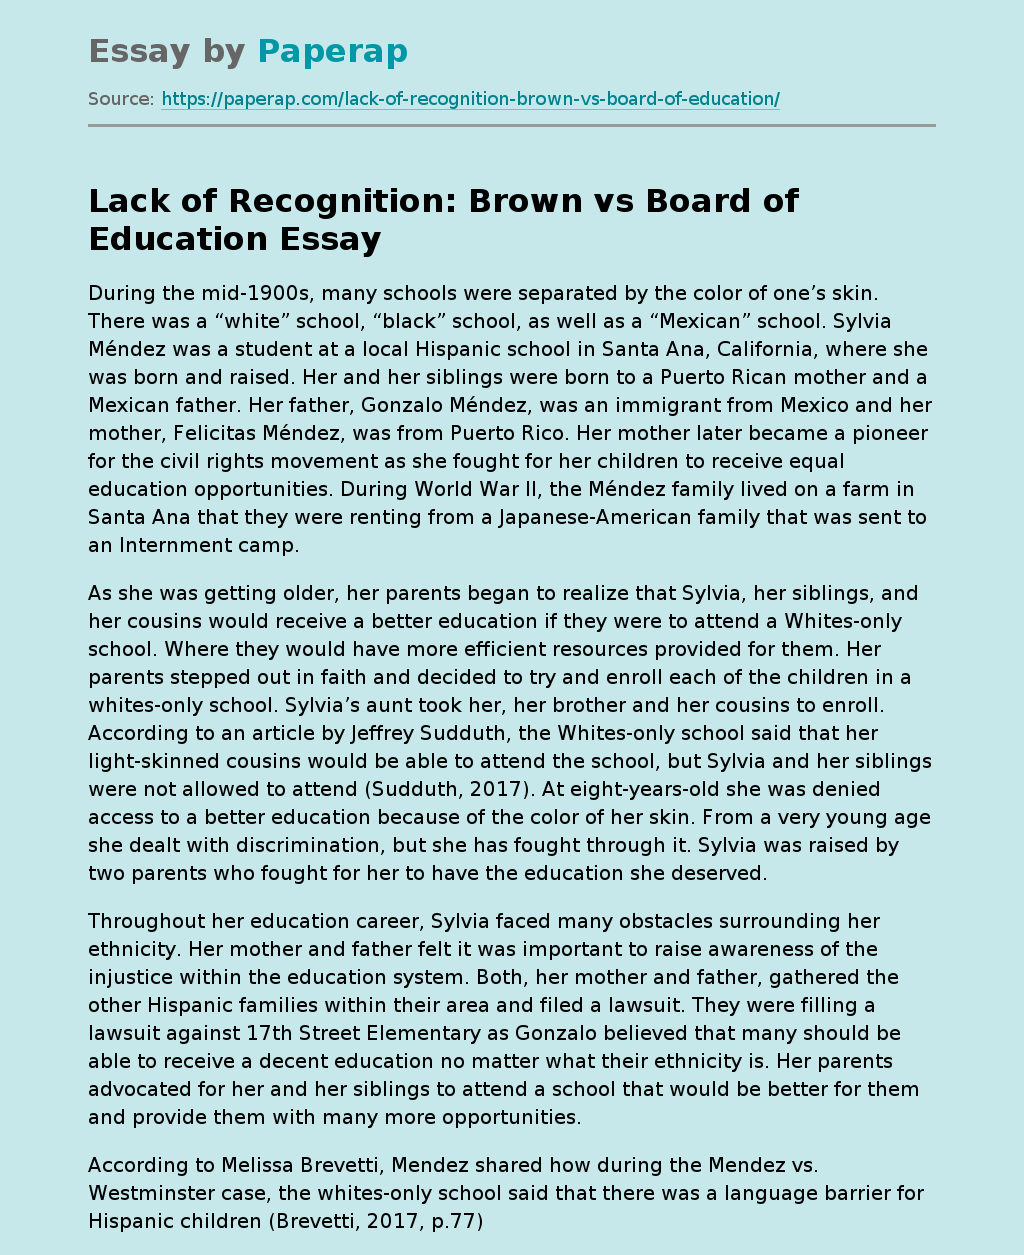 Lack of Recognition: Brown vs Board of Education